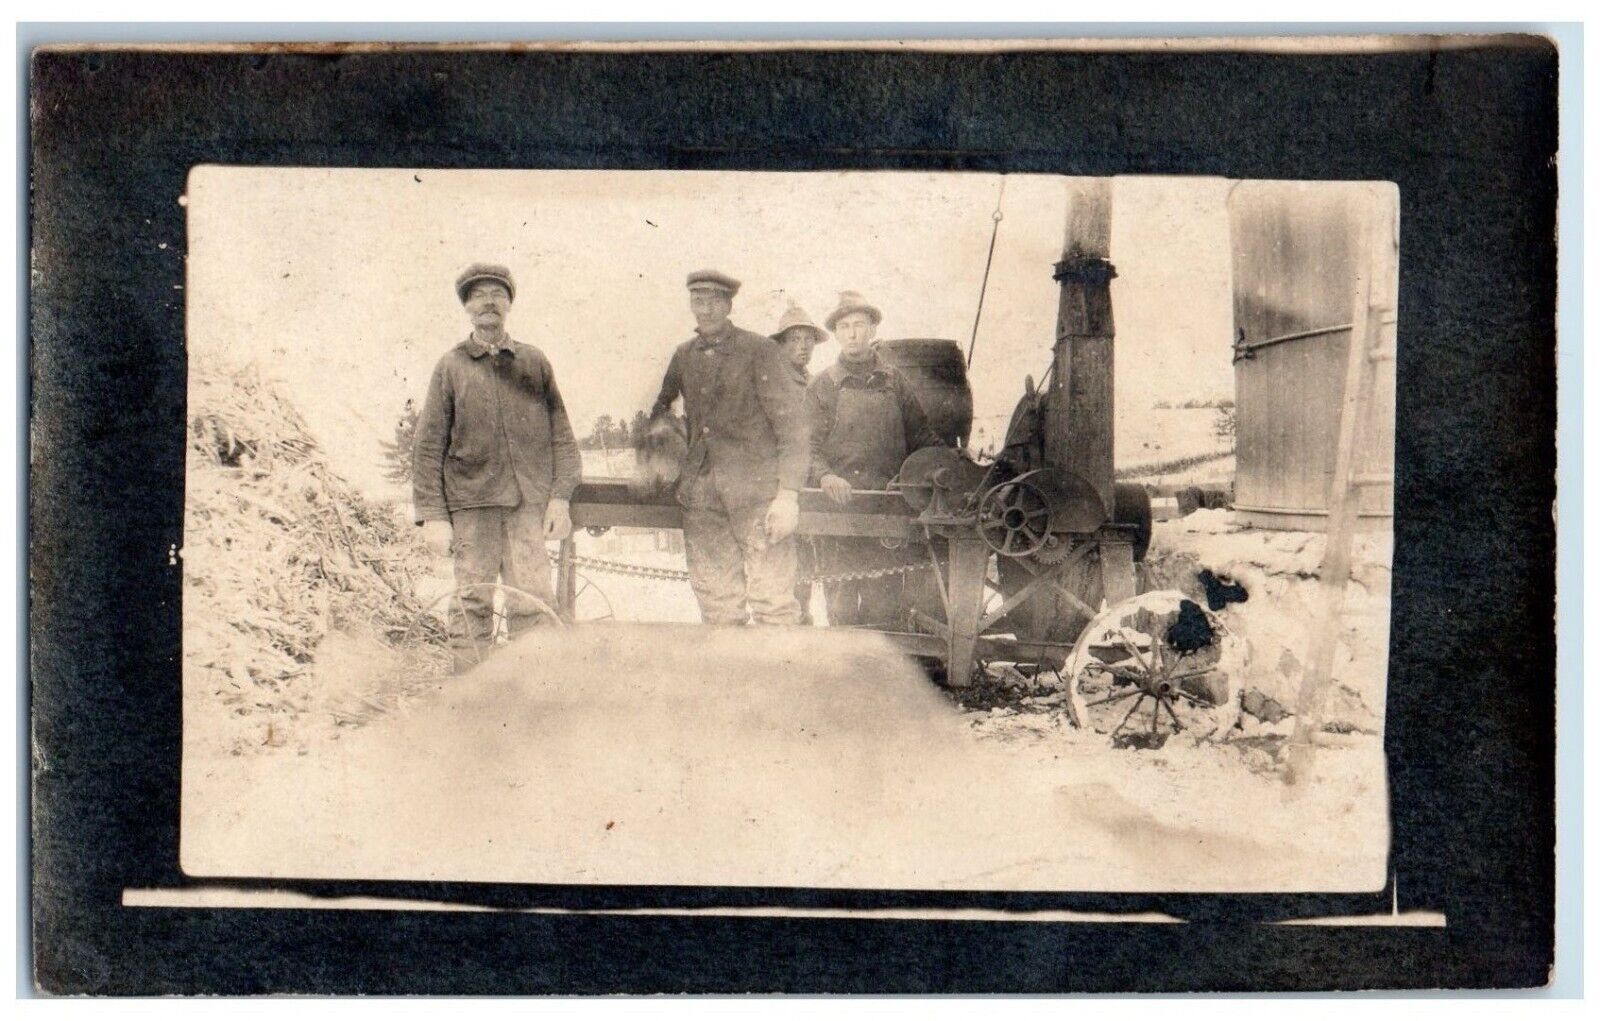 Amherst Wisconsin WI Postcard RPPC Photo Machinery Equipment Farming 1917 Posted